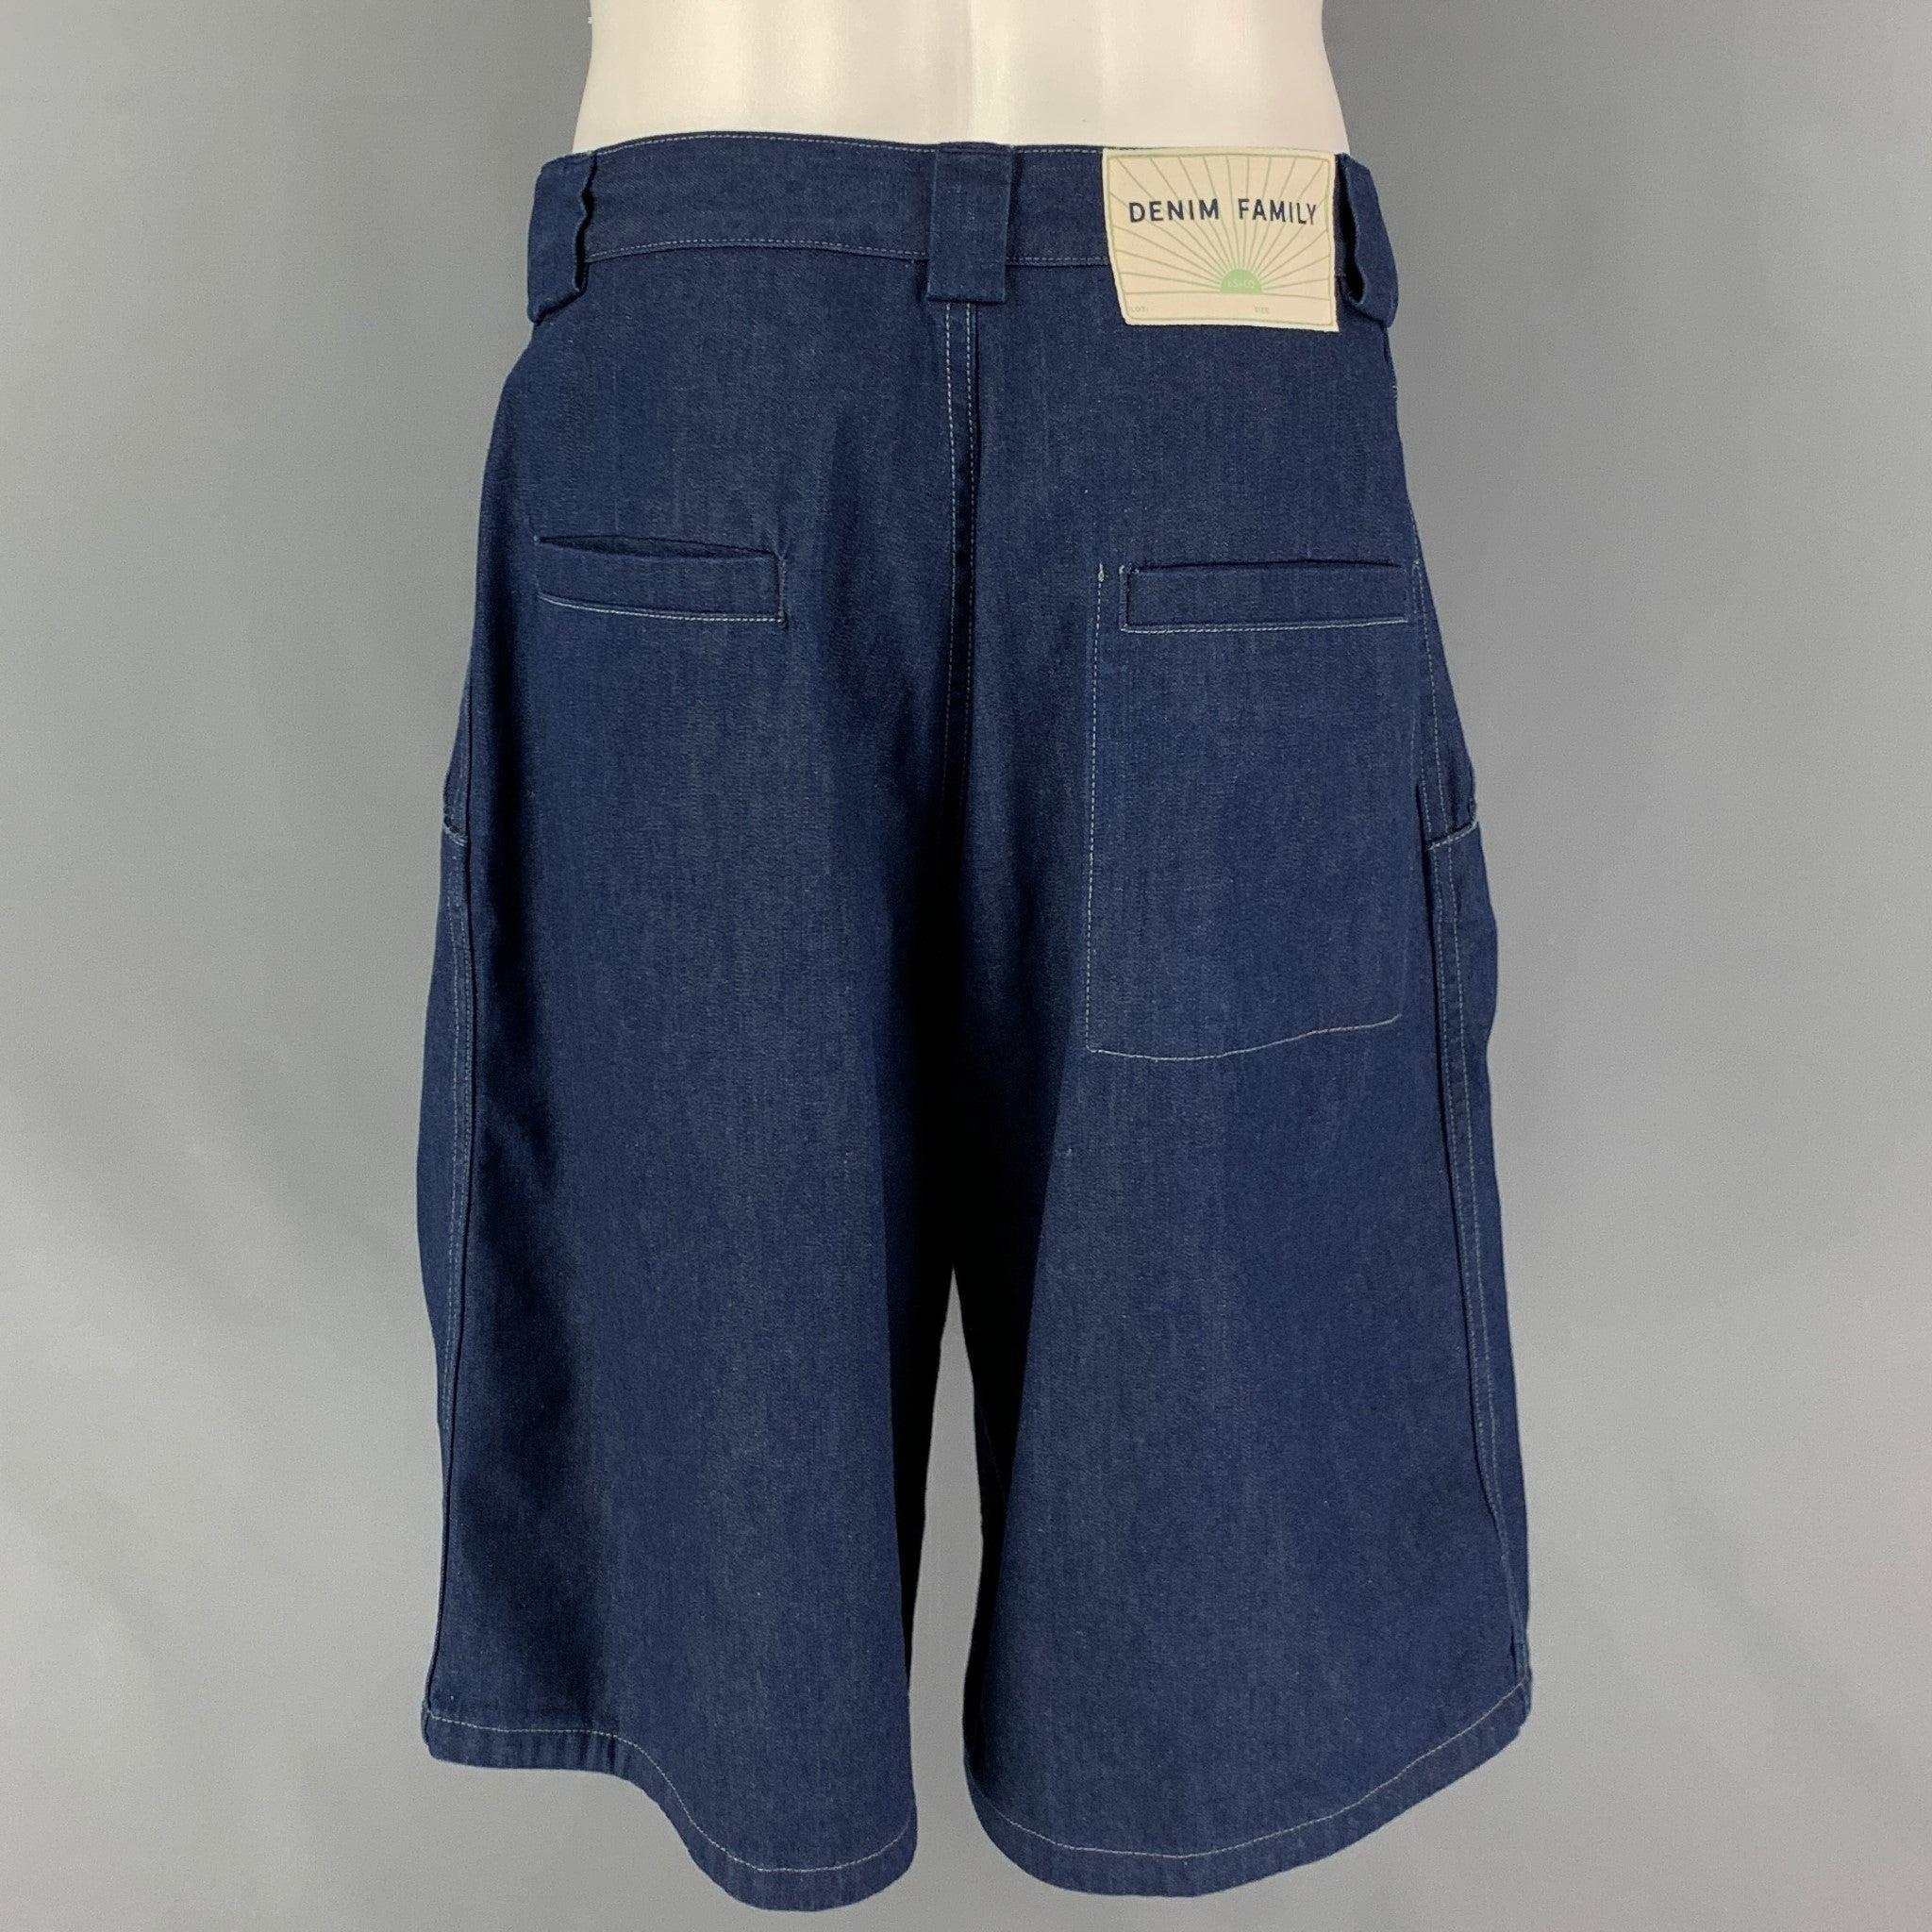 LEVI'S 'DENIM FAMILY' shorts comes in a indigo cotton featuring a pleated style, contrast stitching, and a zip fly closure.
Very Good
Pre-Owned Condition. Fabric tag removed.  

Marked:   Size tag removed 

Measurements: 
  Waist: 32 inches  
 Rise: